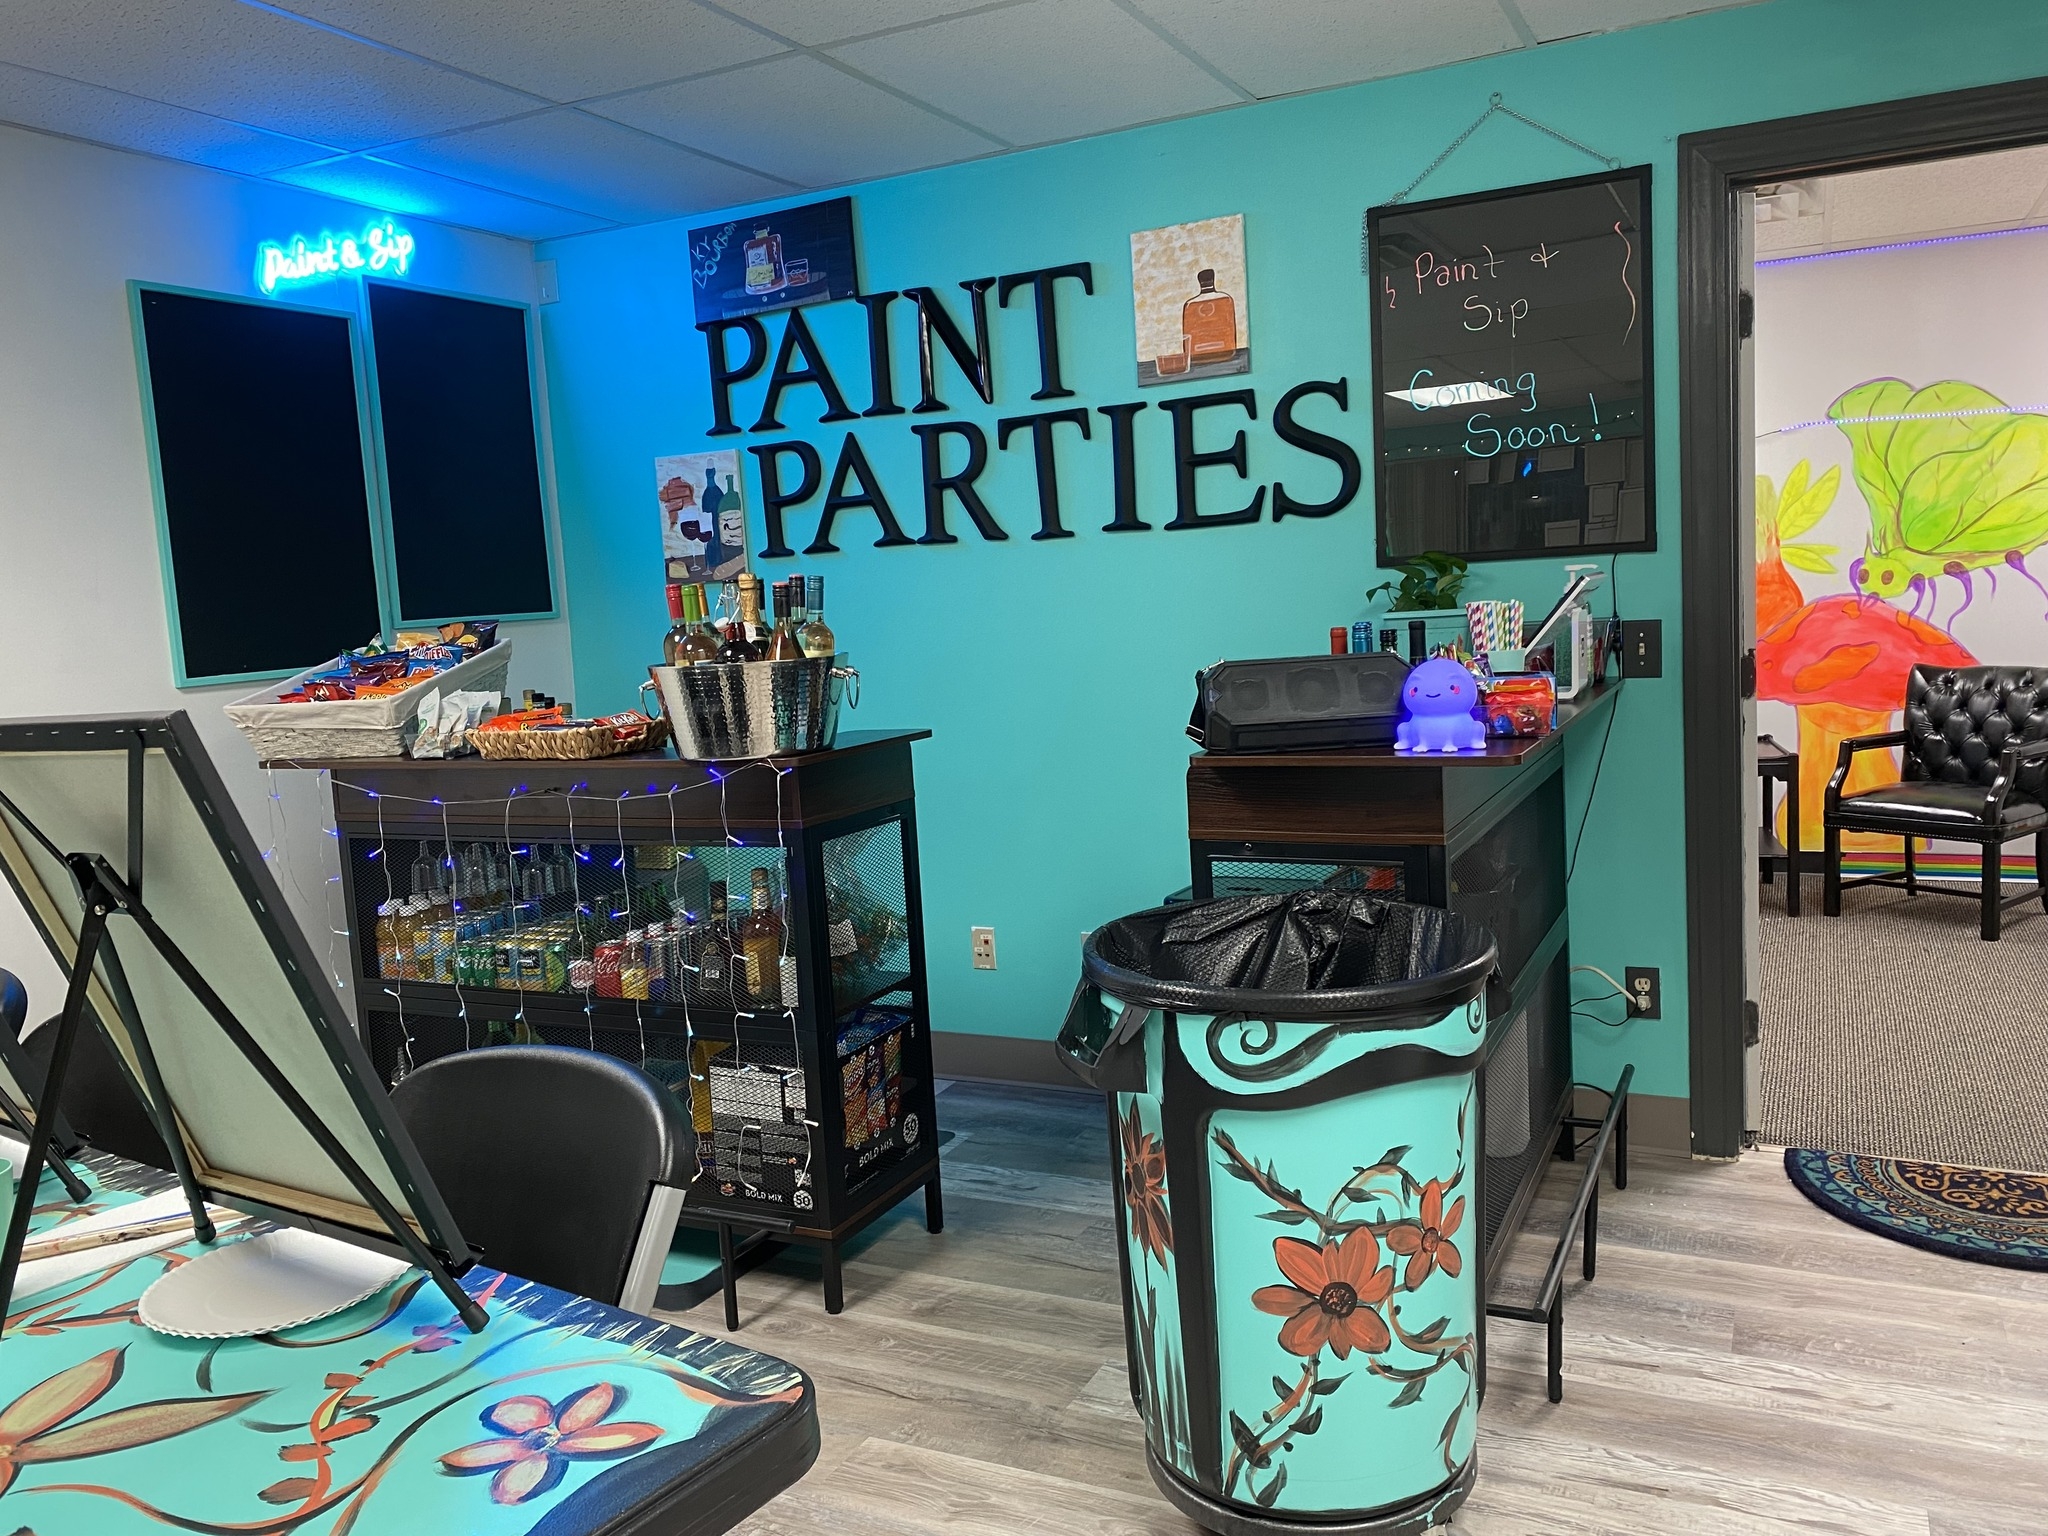 Paint Parties/Designs by Stein Coupon